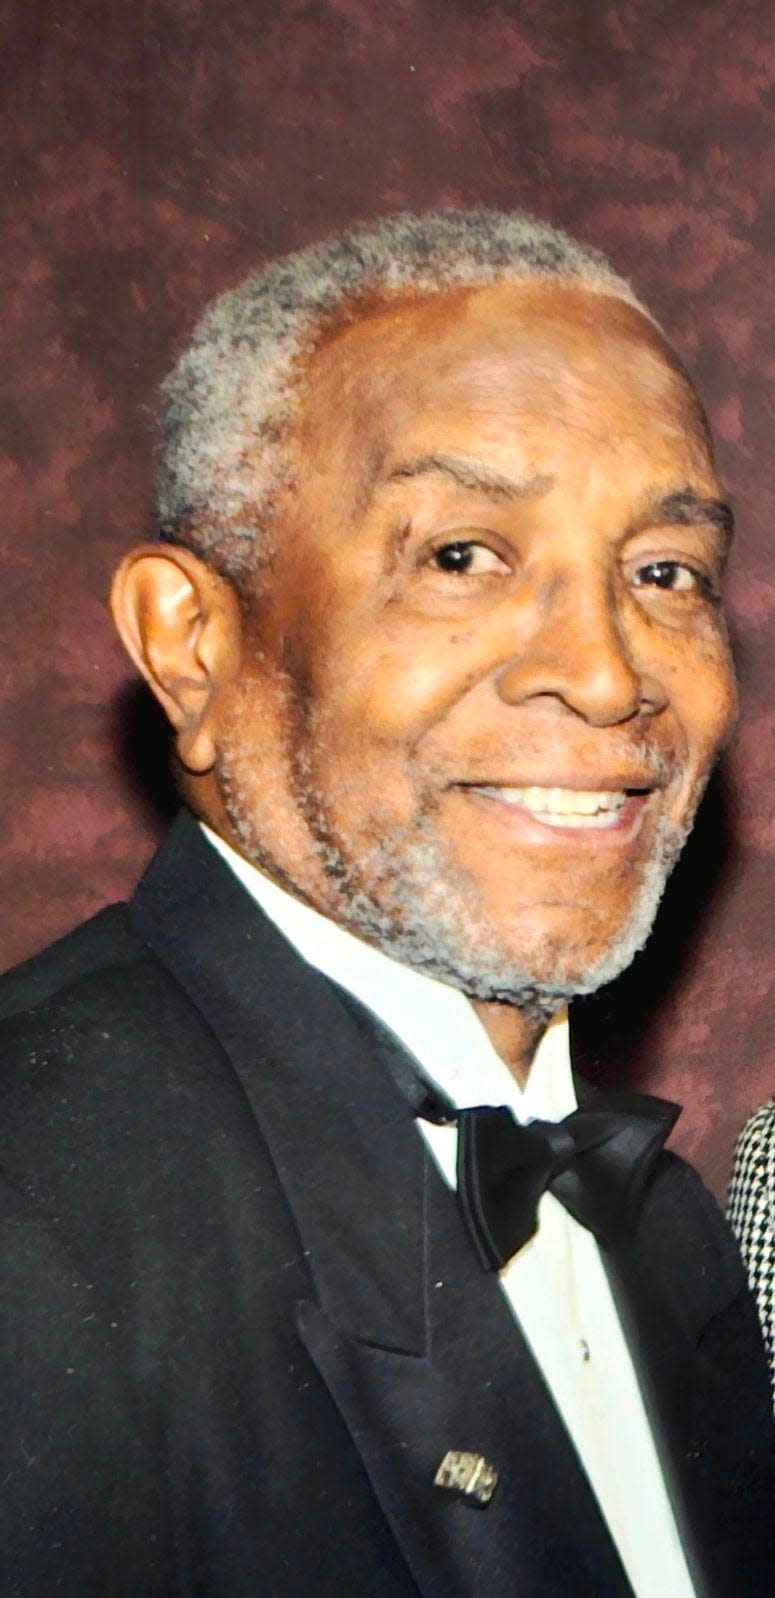 Carl Johnson died Dec. 26, 2023 at the age of 88. He served on the Memphis City School Board for 35 years, and was the longest-serving elected member of the body.